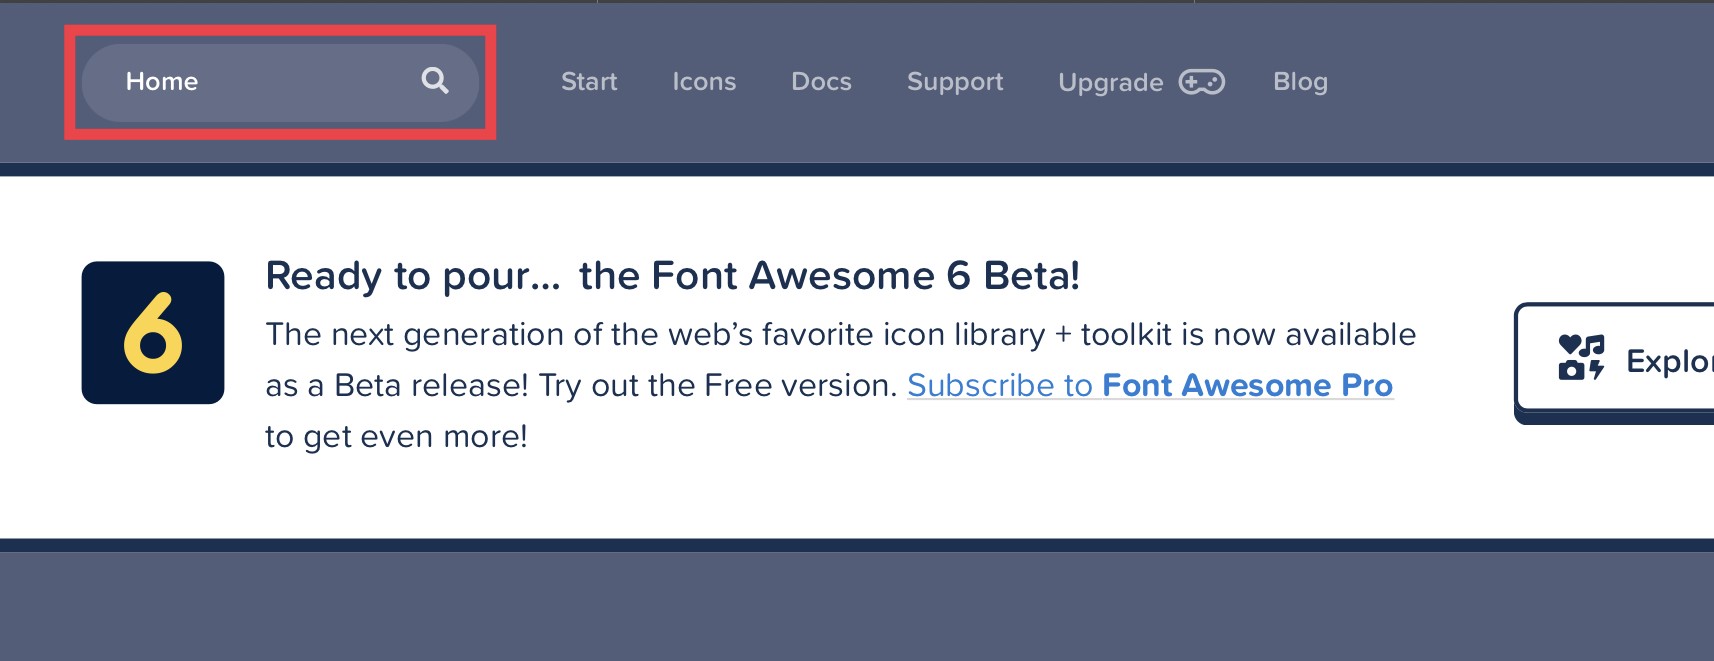 Fontawesome home